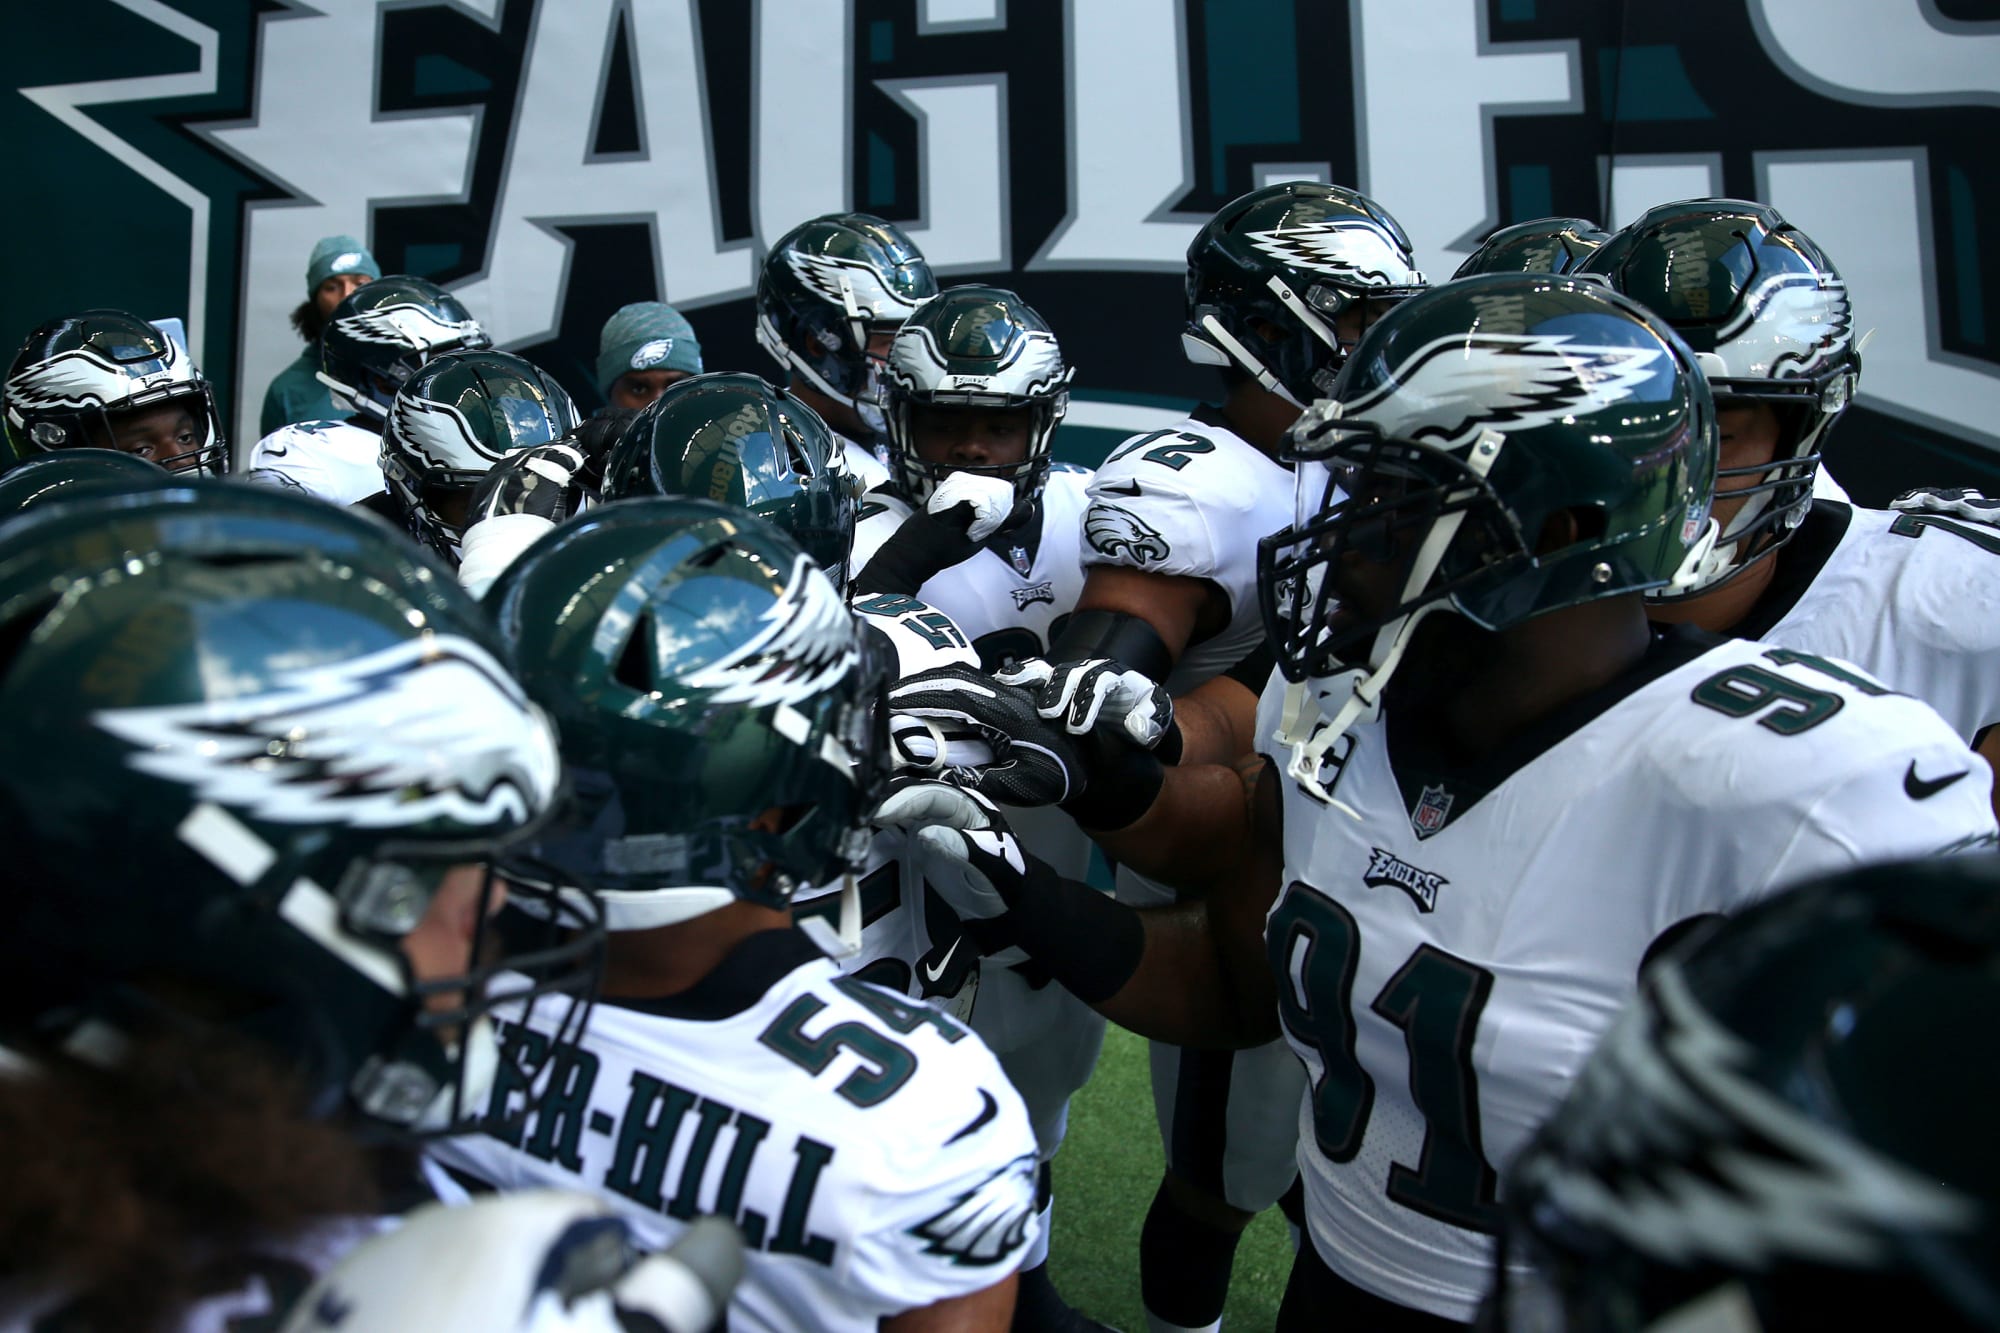 ITI's official Philadelphia Eagles final 53 man roster projection